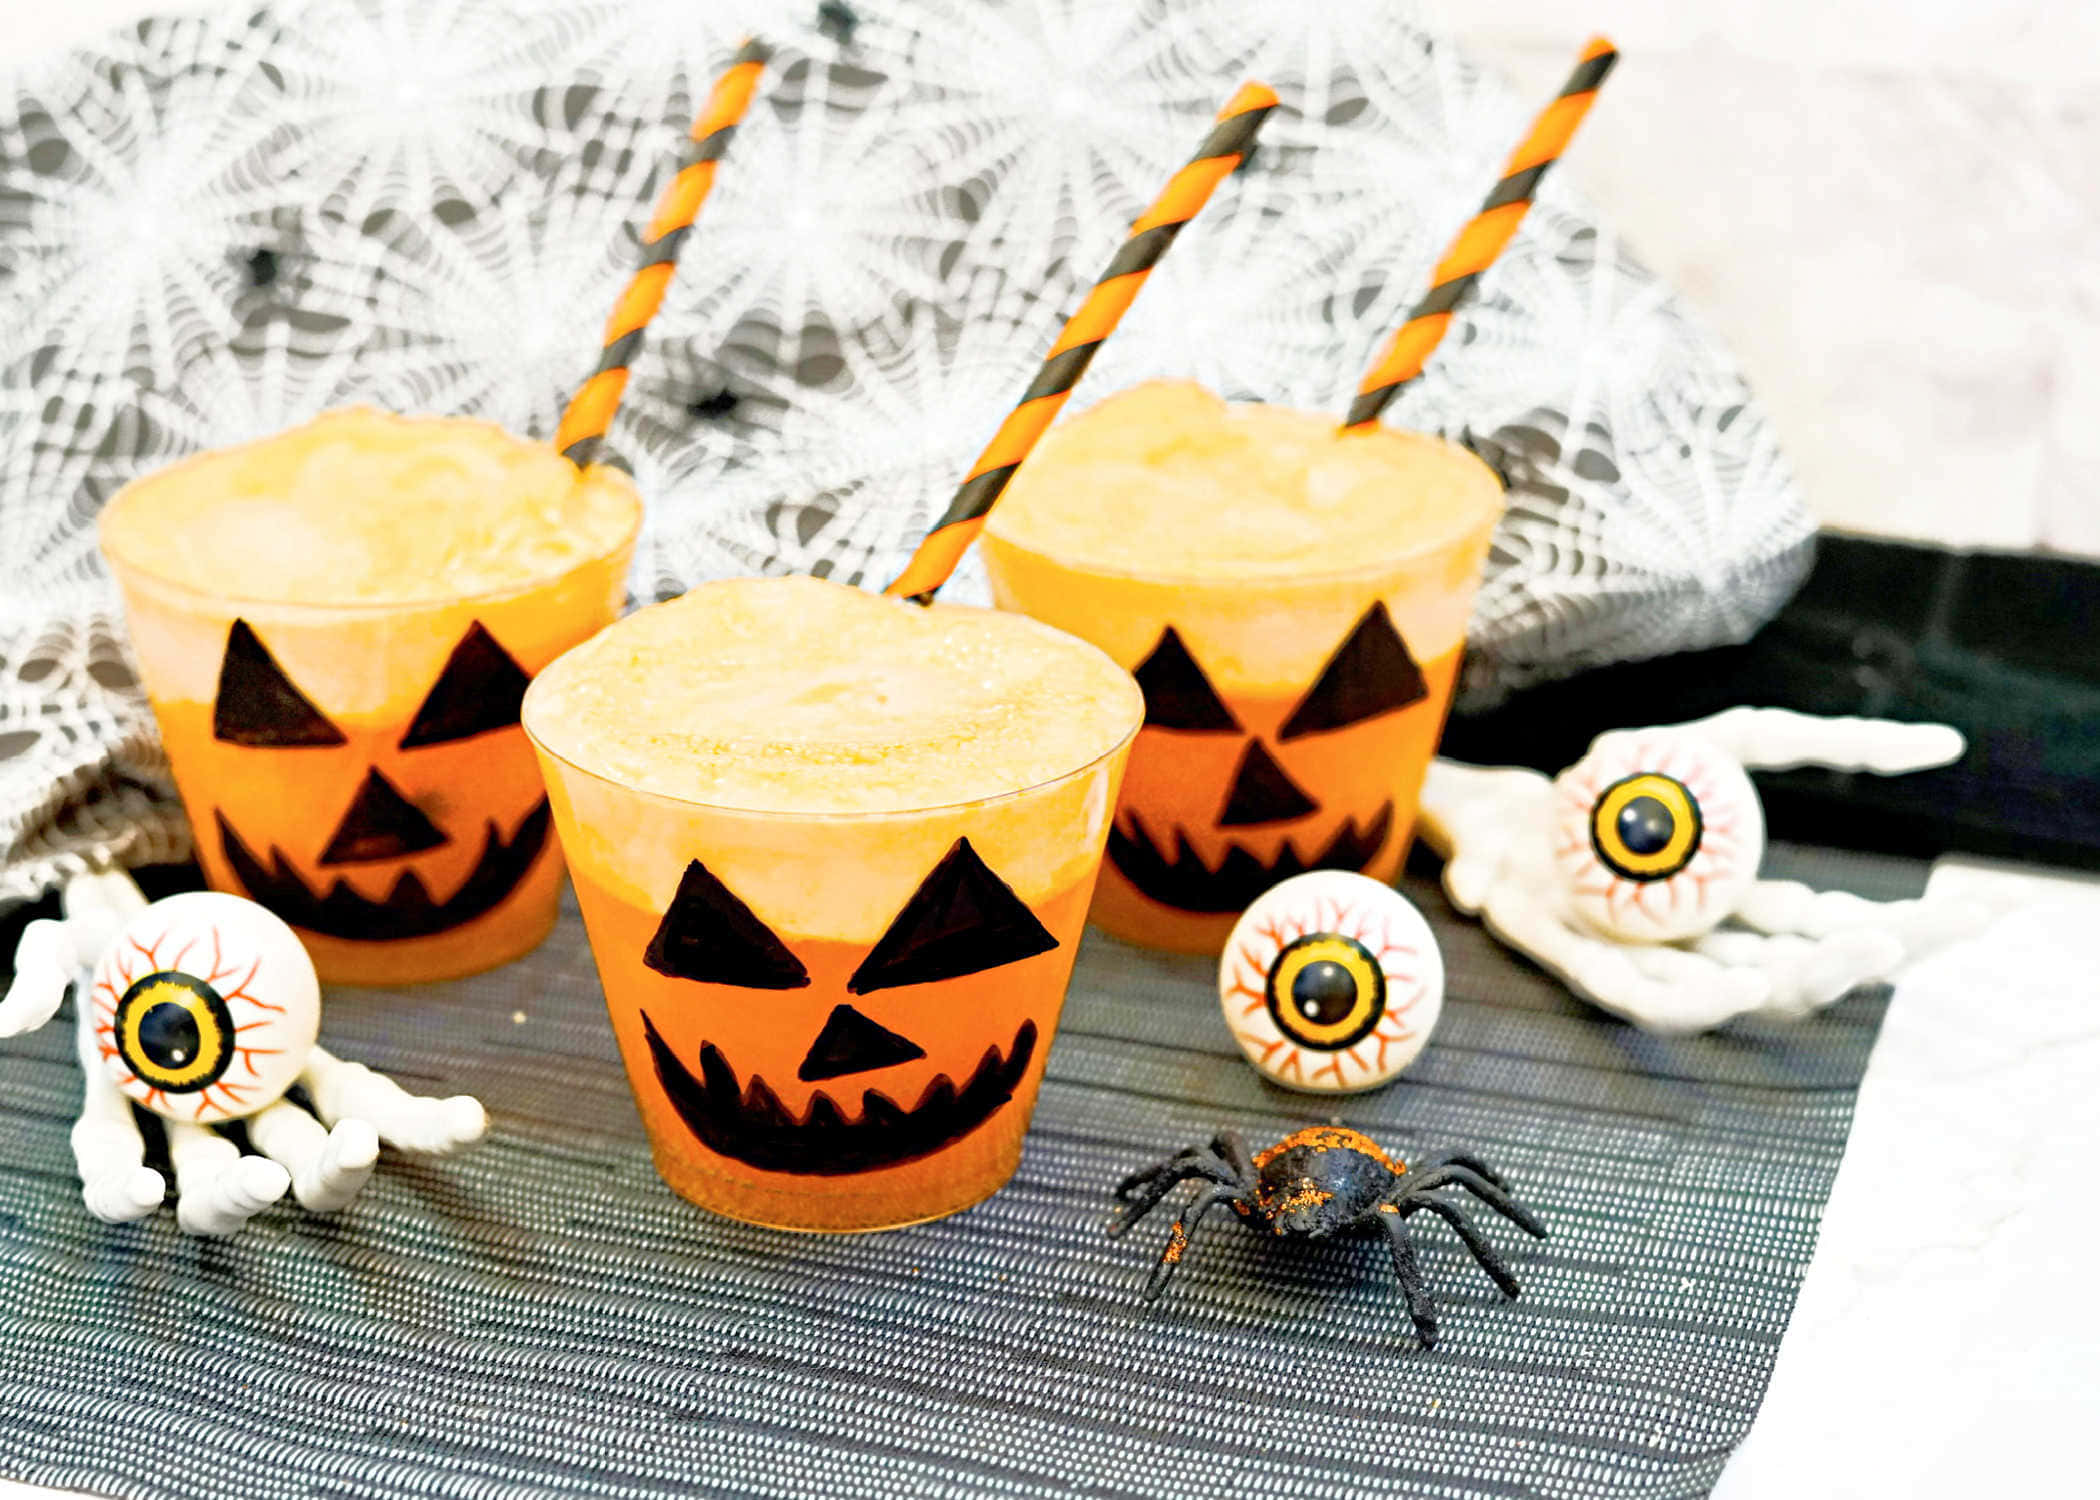 Get wrapped up in the spooky vibe and enjoy some of these tasty and creative Halloween Drinks! Wallpaper